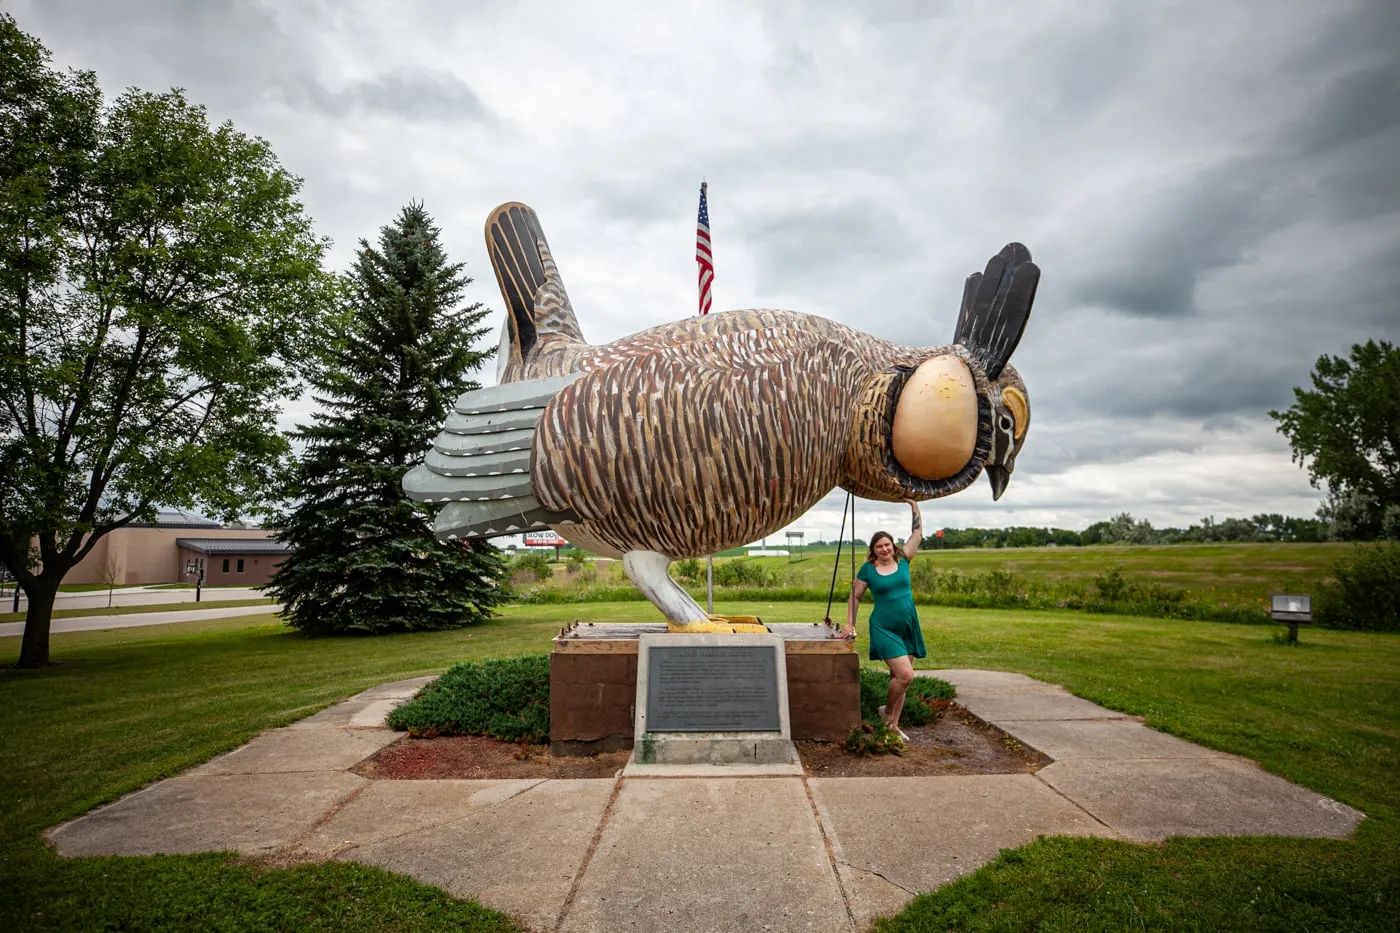 World's Largest "Booming" Prairie Chicken in Rothsay, Minnesota | Minnesota Roadside Attractions